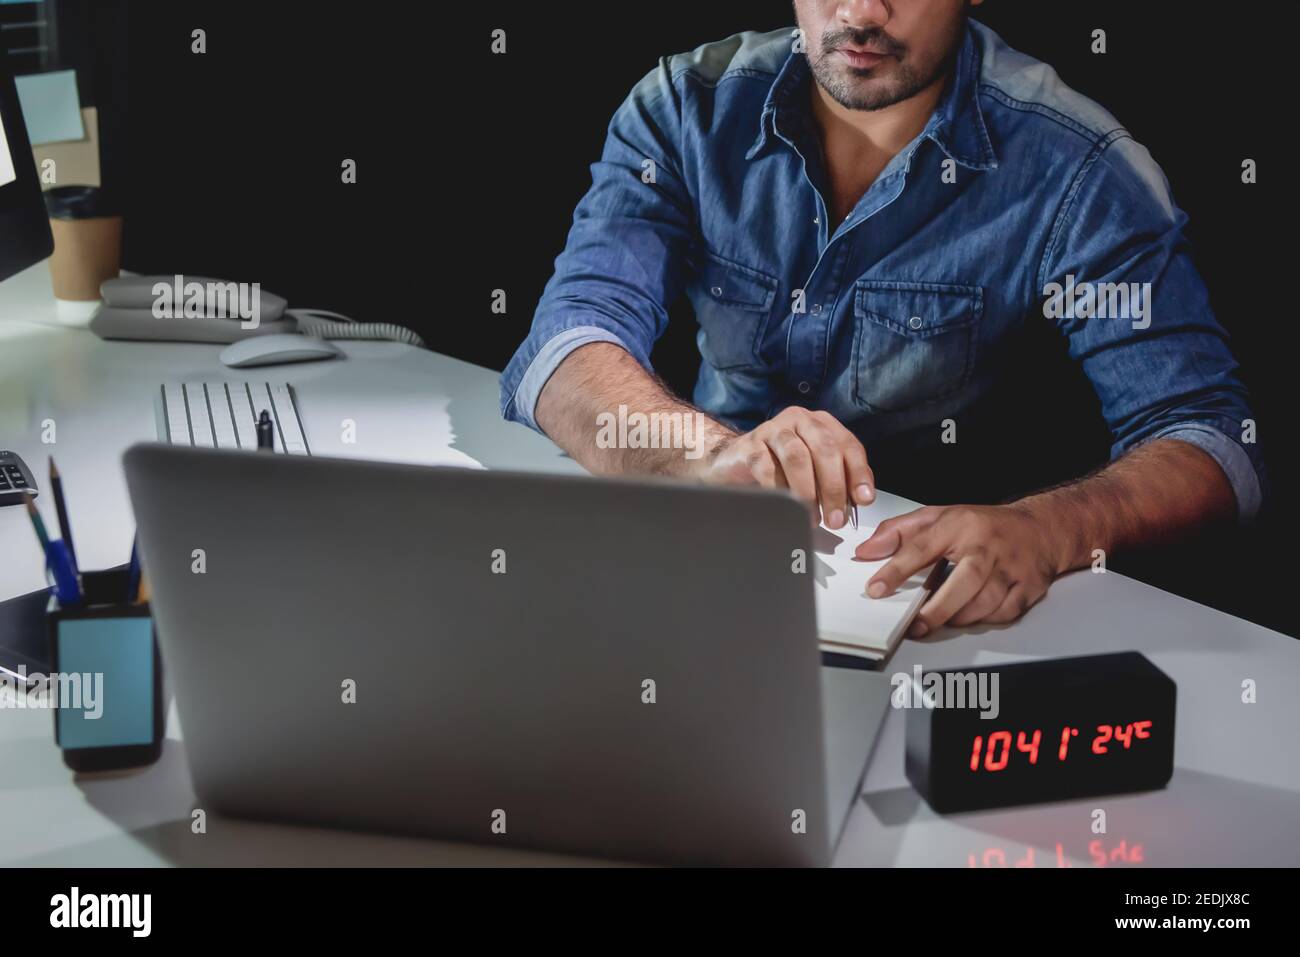 Workaholic man staying overtime late at night in the office working at his desk looking at laptop computer Stock Photo